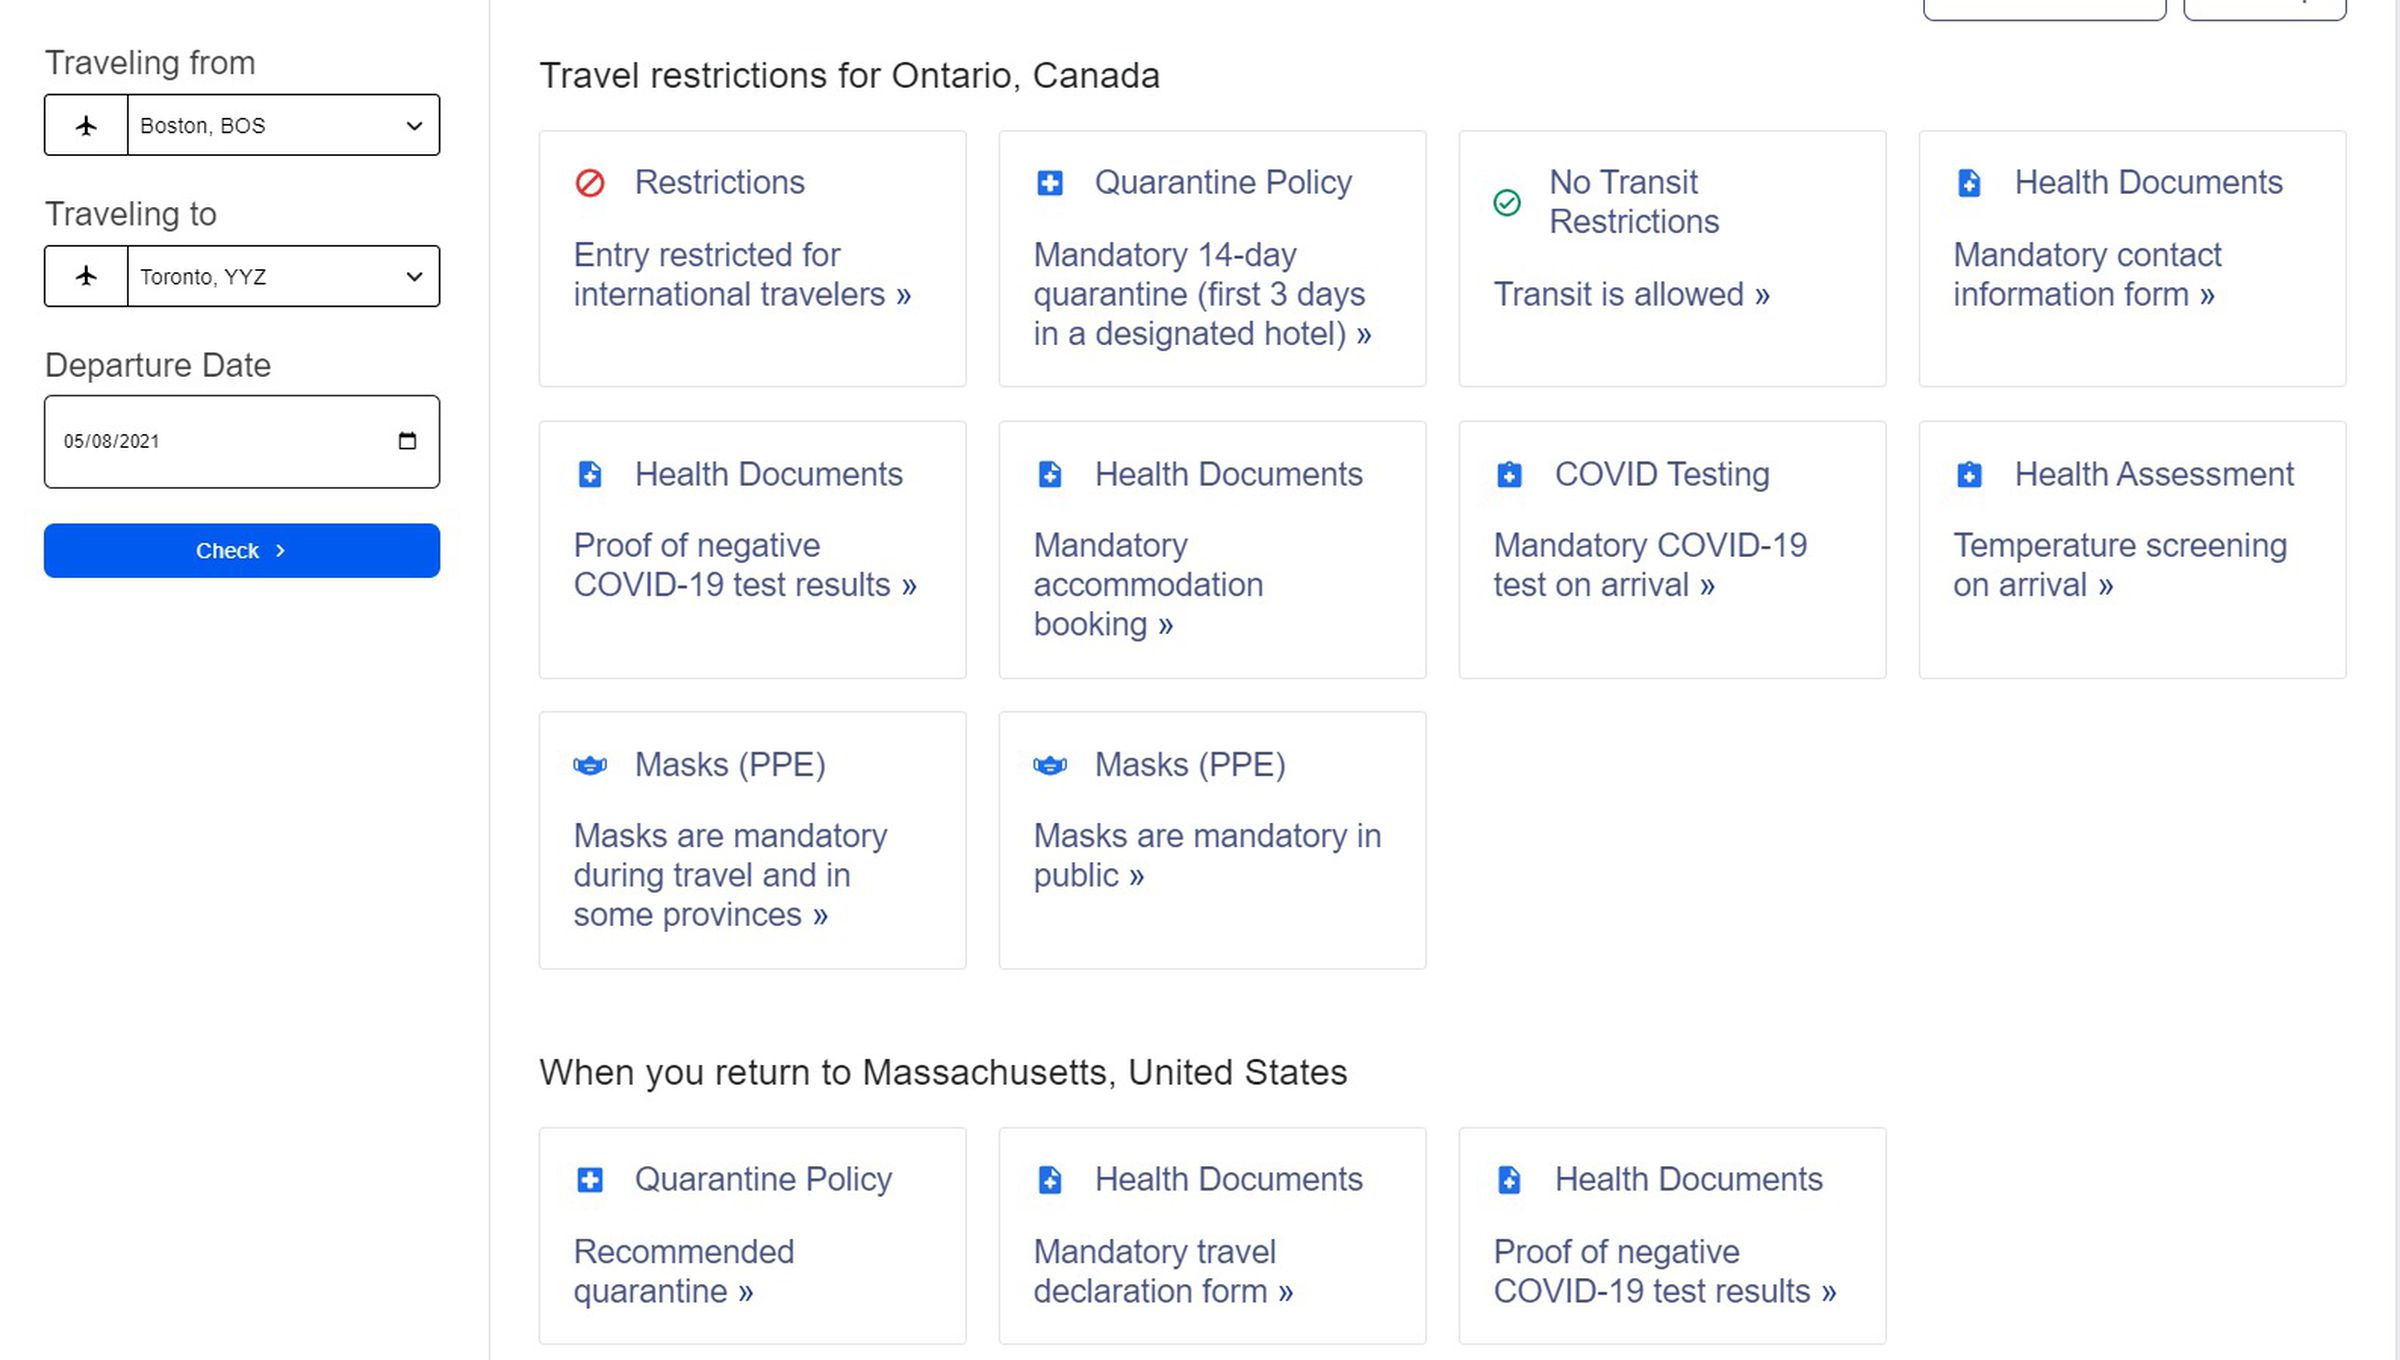 Travel Advisor shows the COVID-19 restrictions for a May 8th trip from Boston to Toronto.